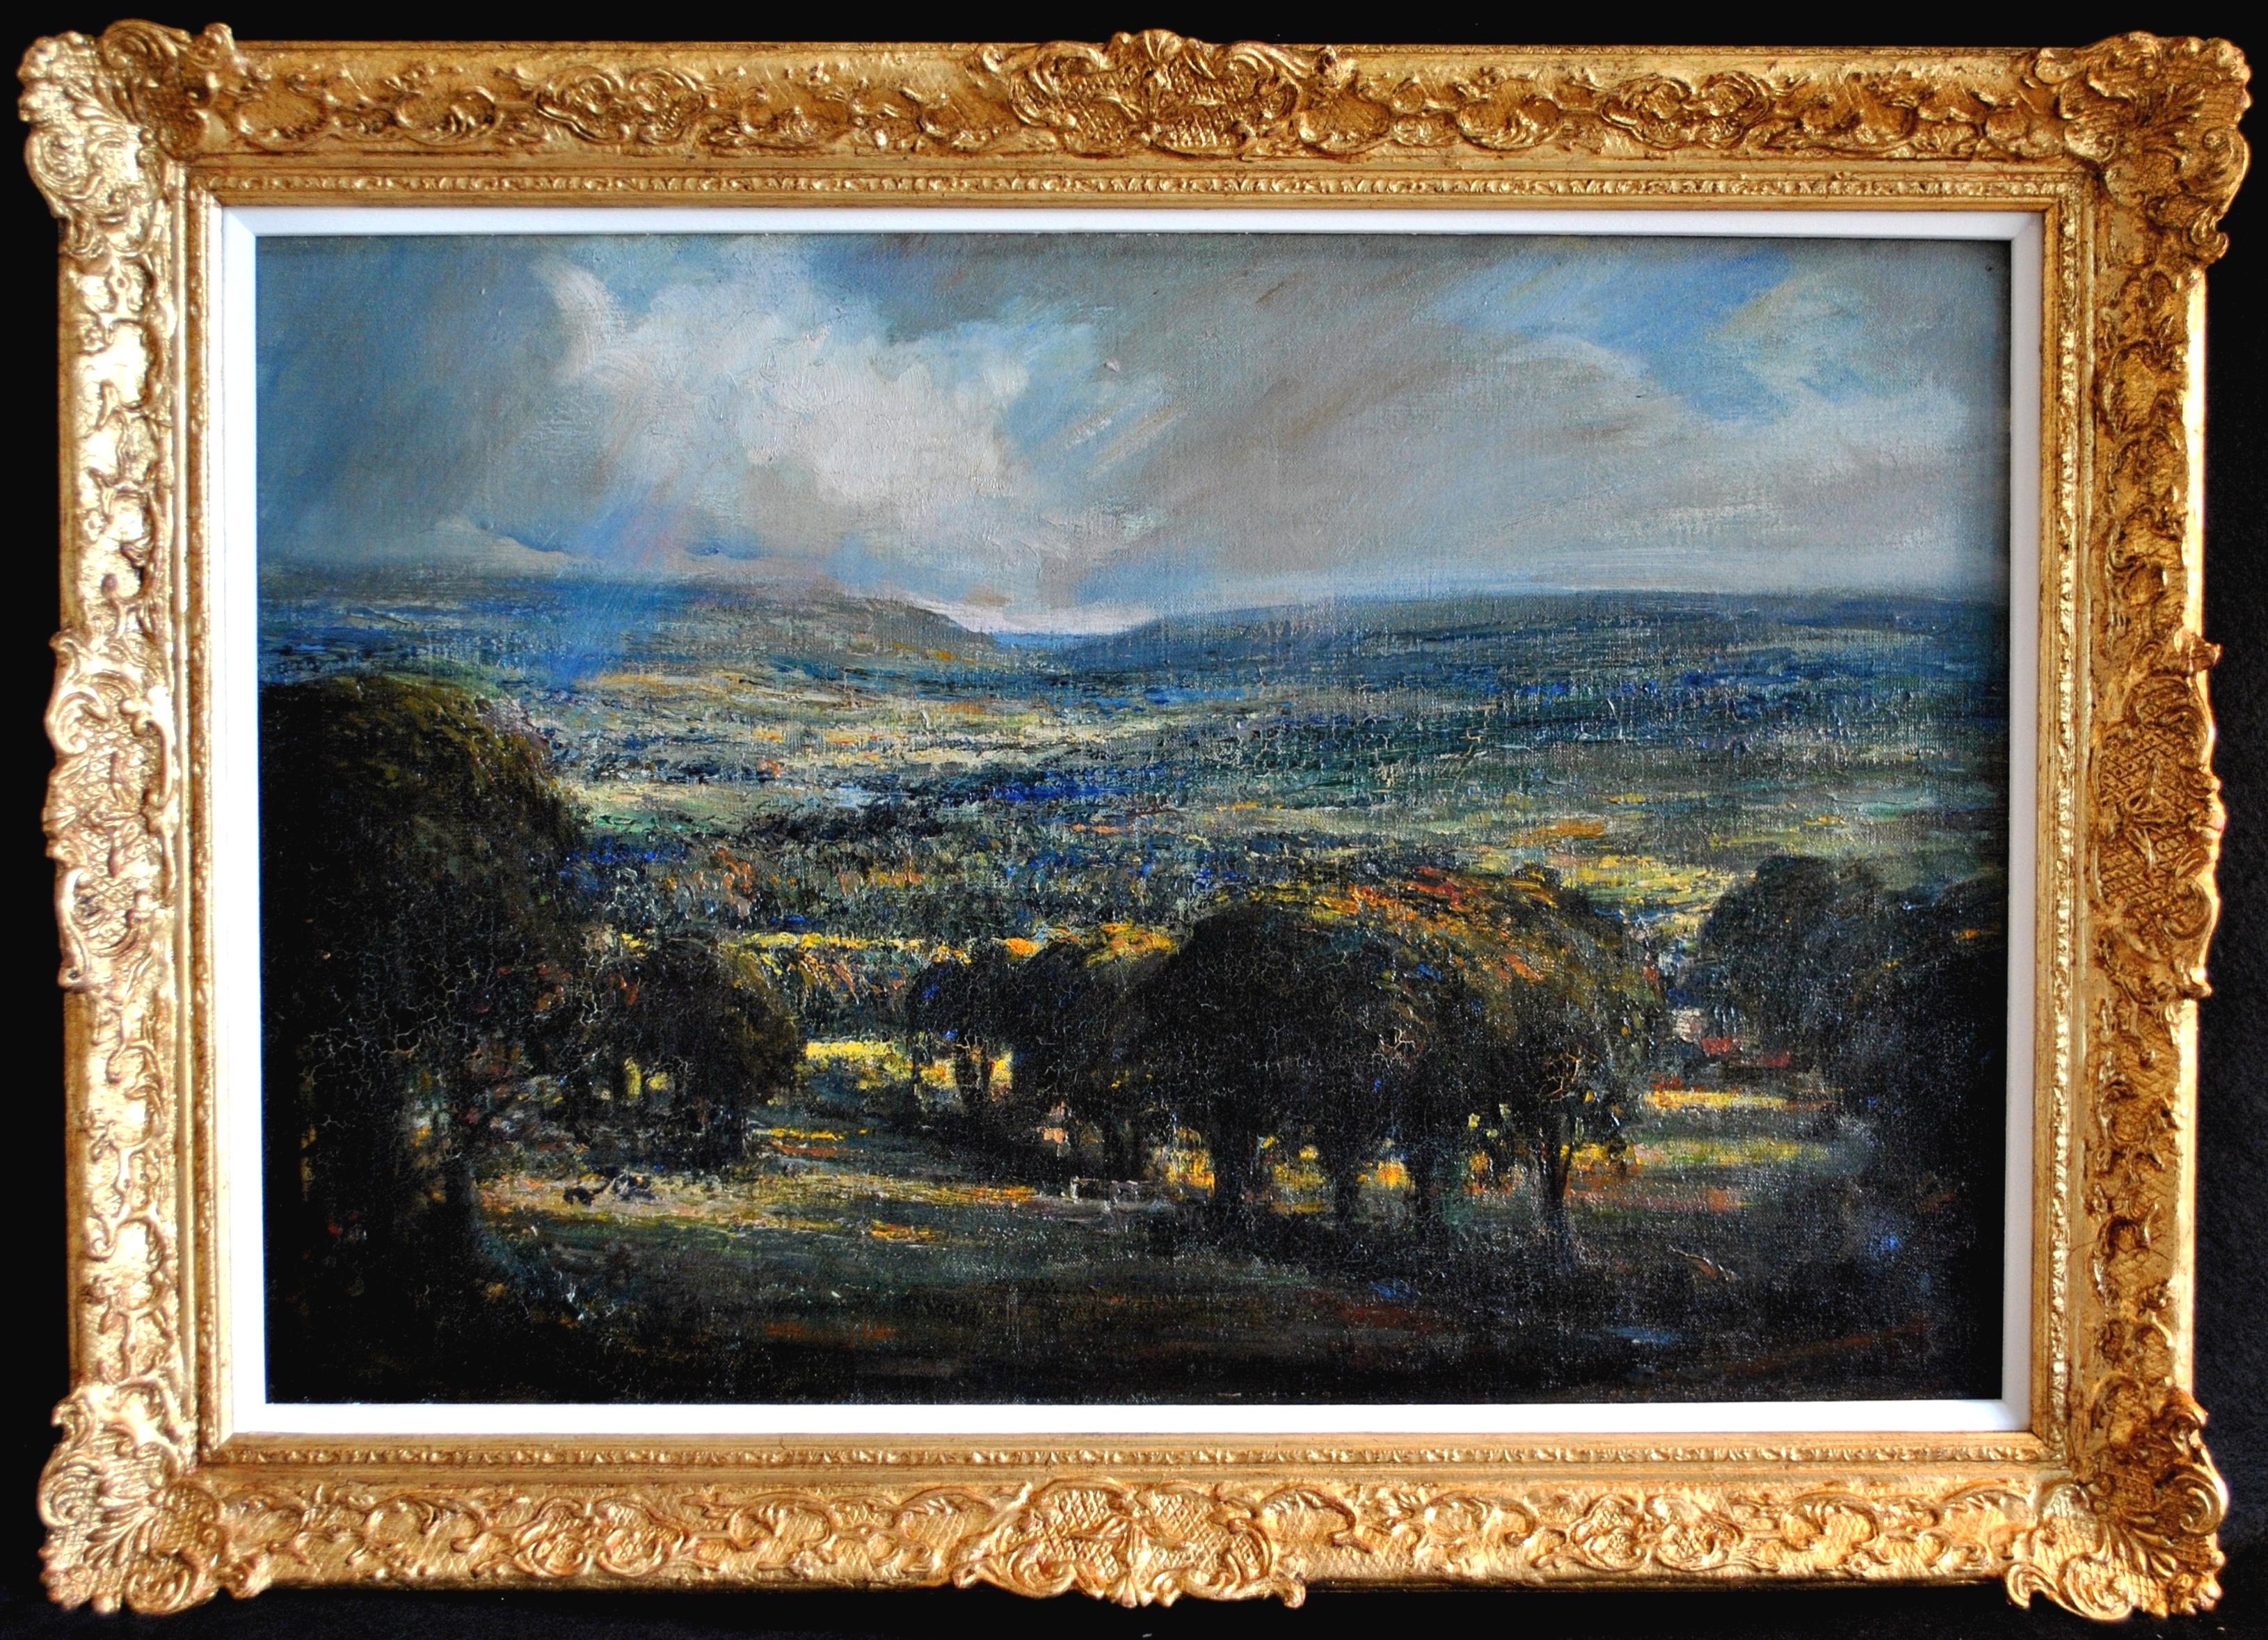 19th Century French School Landscape Painting - Extensive Landscape - Large French Impressionist Atmospheric Antique Painting